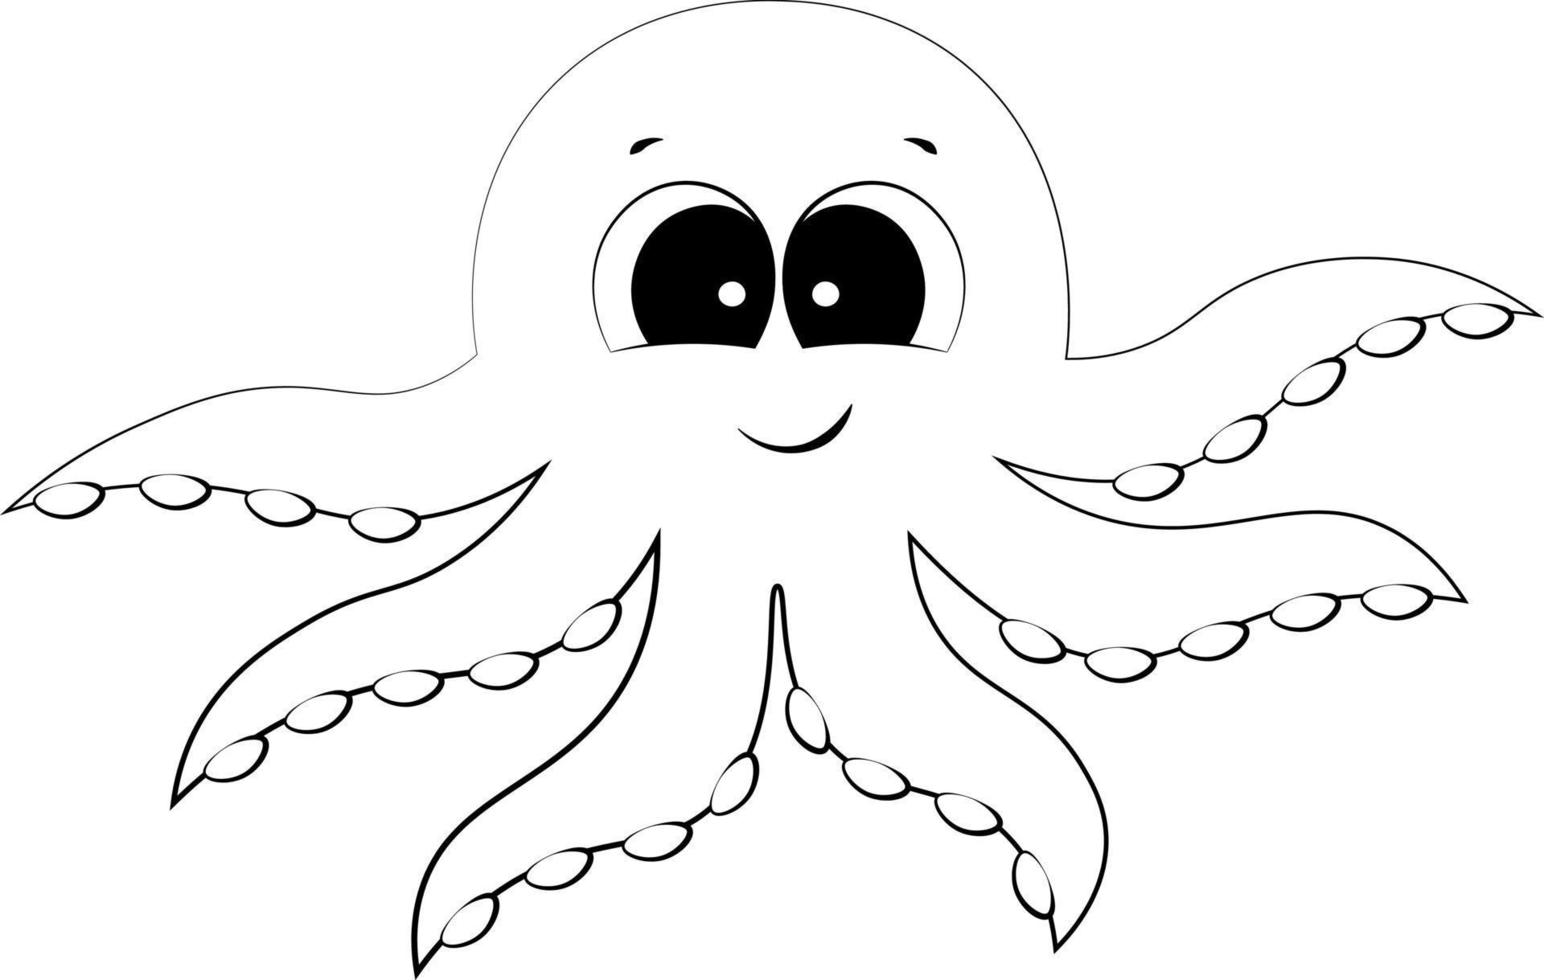 Cute cartoon Octopus. Draw illustration in black and white vector